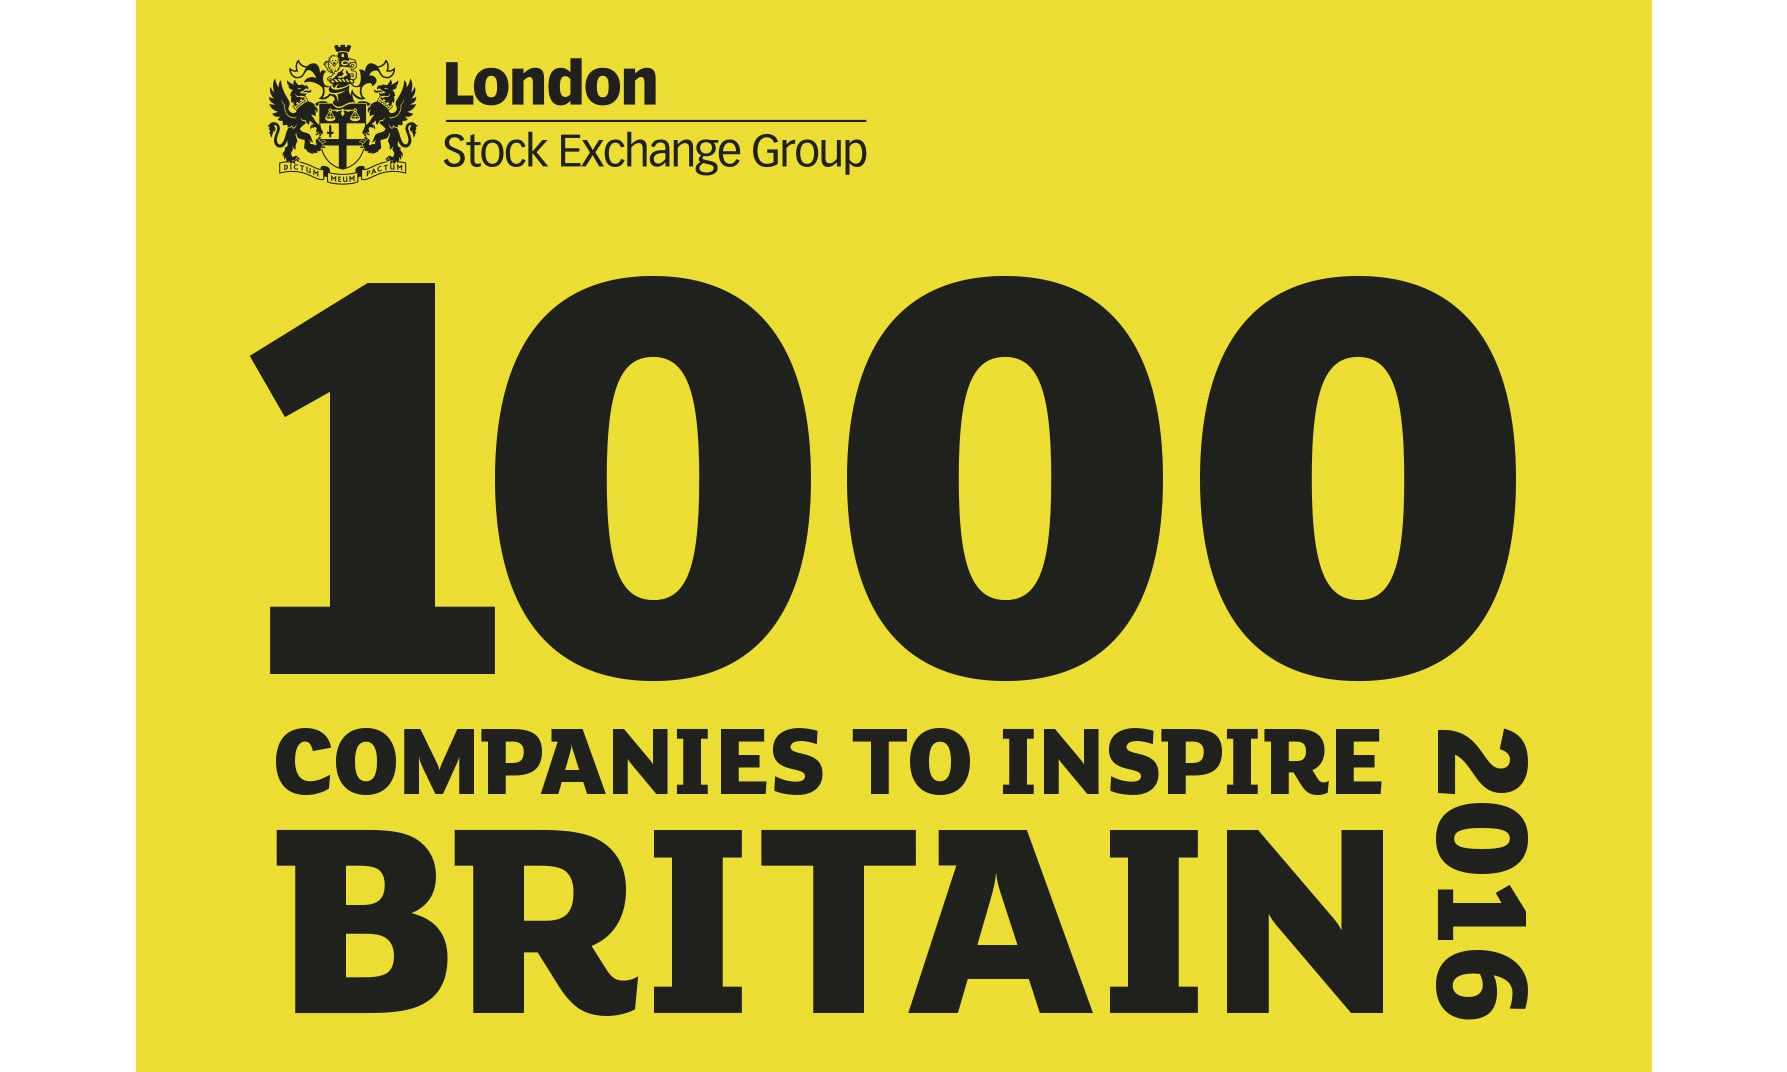 Paxton identified in London Stock Exchange’s ‘1000 Companies to Inspire Britain’